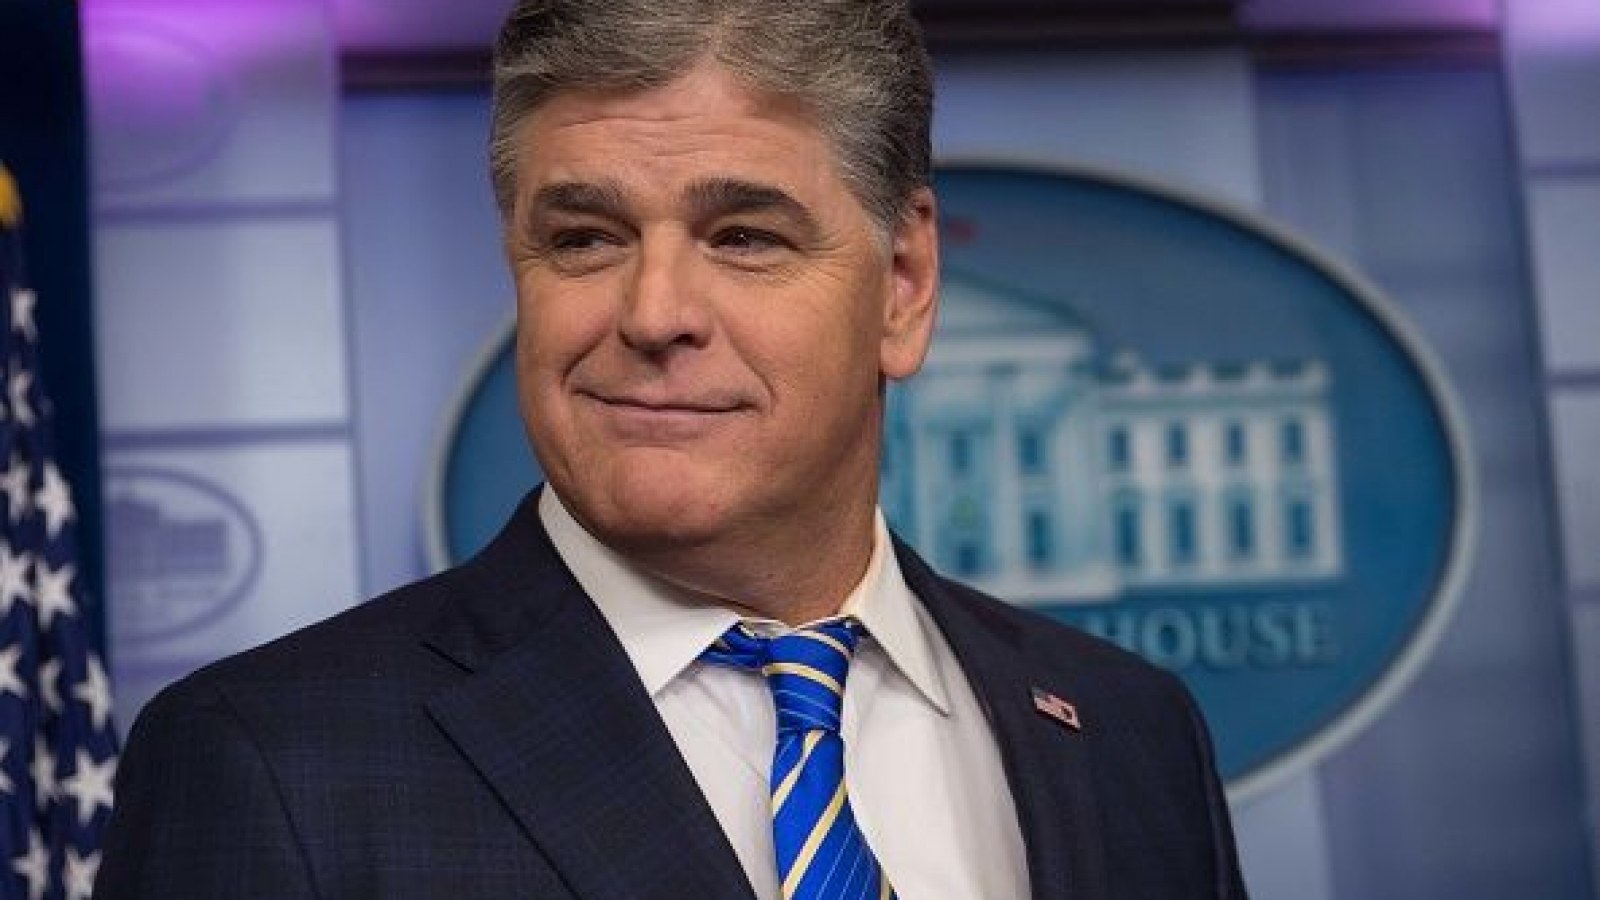 Sean Hannity Biography And Net Worth